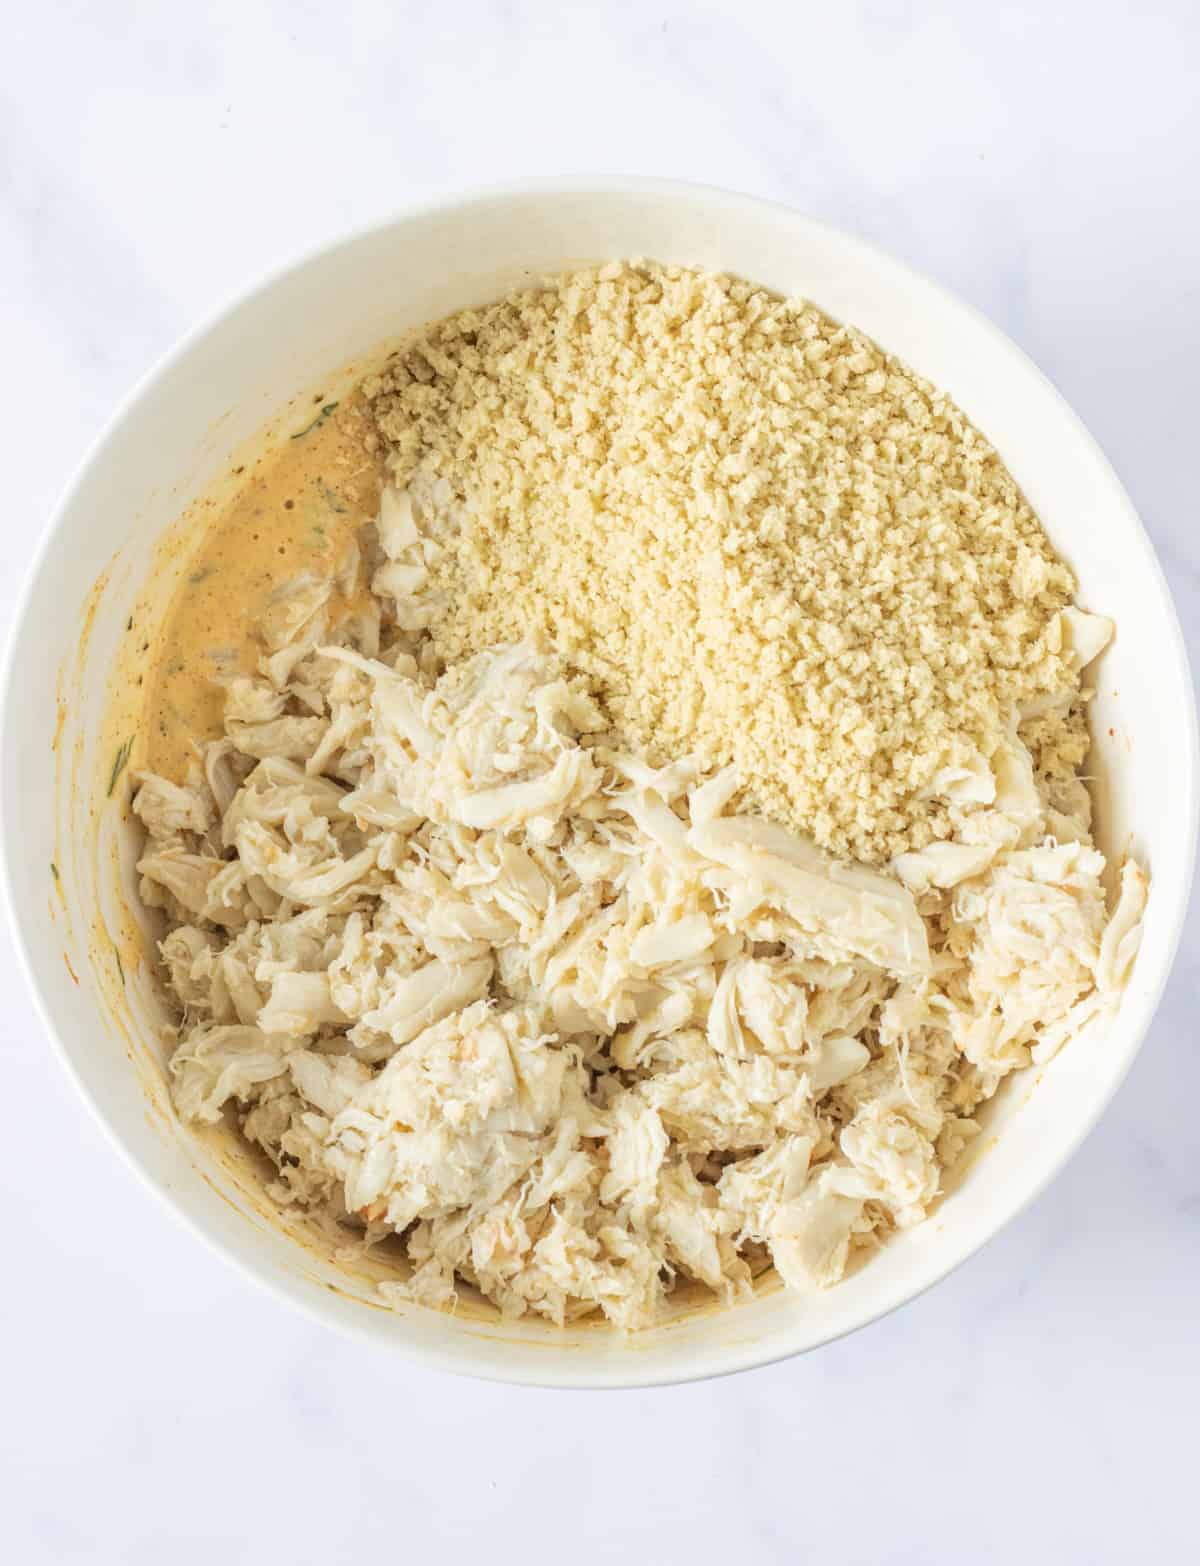 Crab meat and panko crumbs added to the wet mixture.